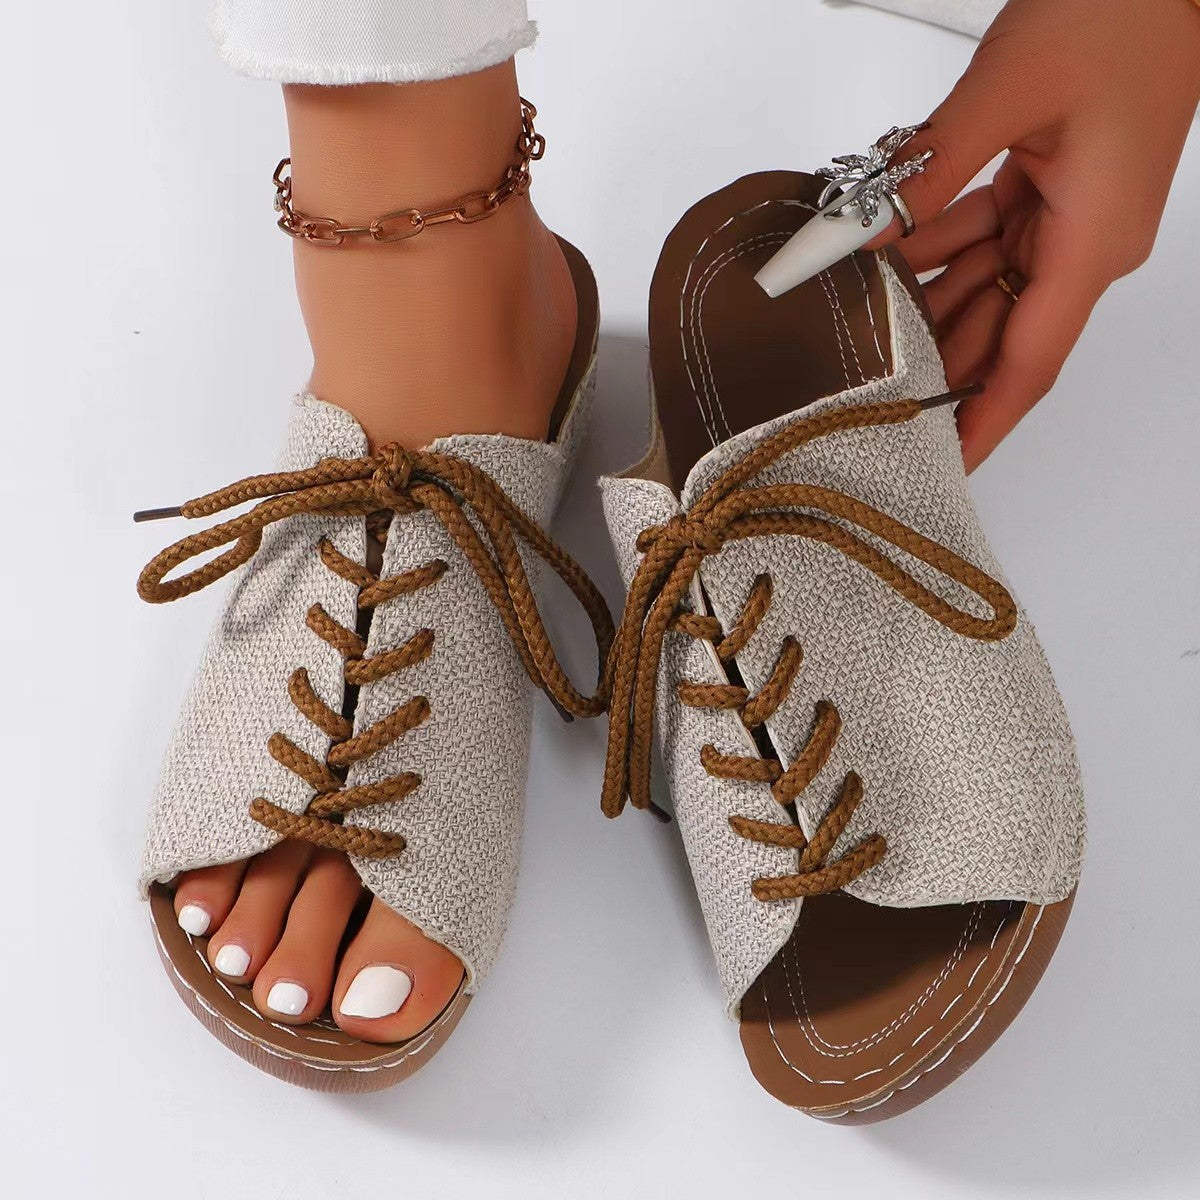 Lace-Up Open Toe Wedge Sandals